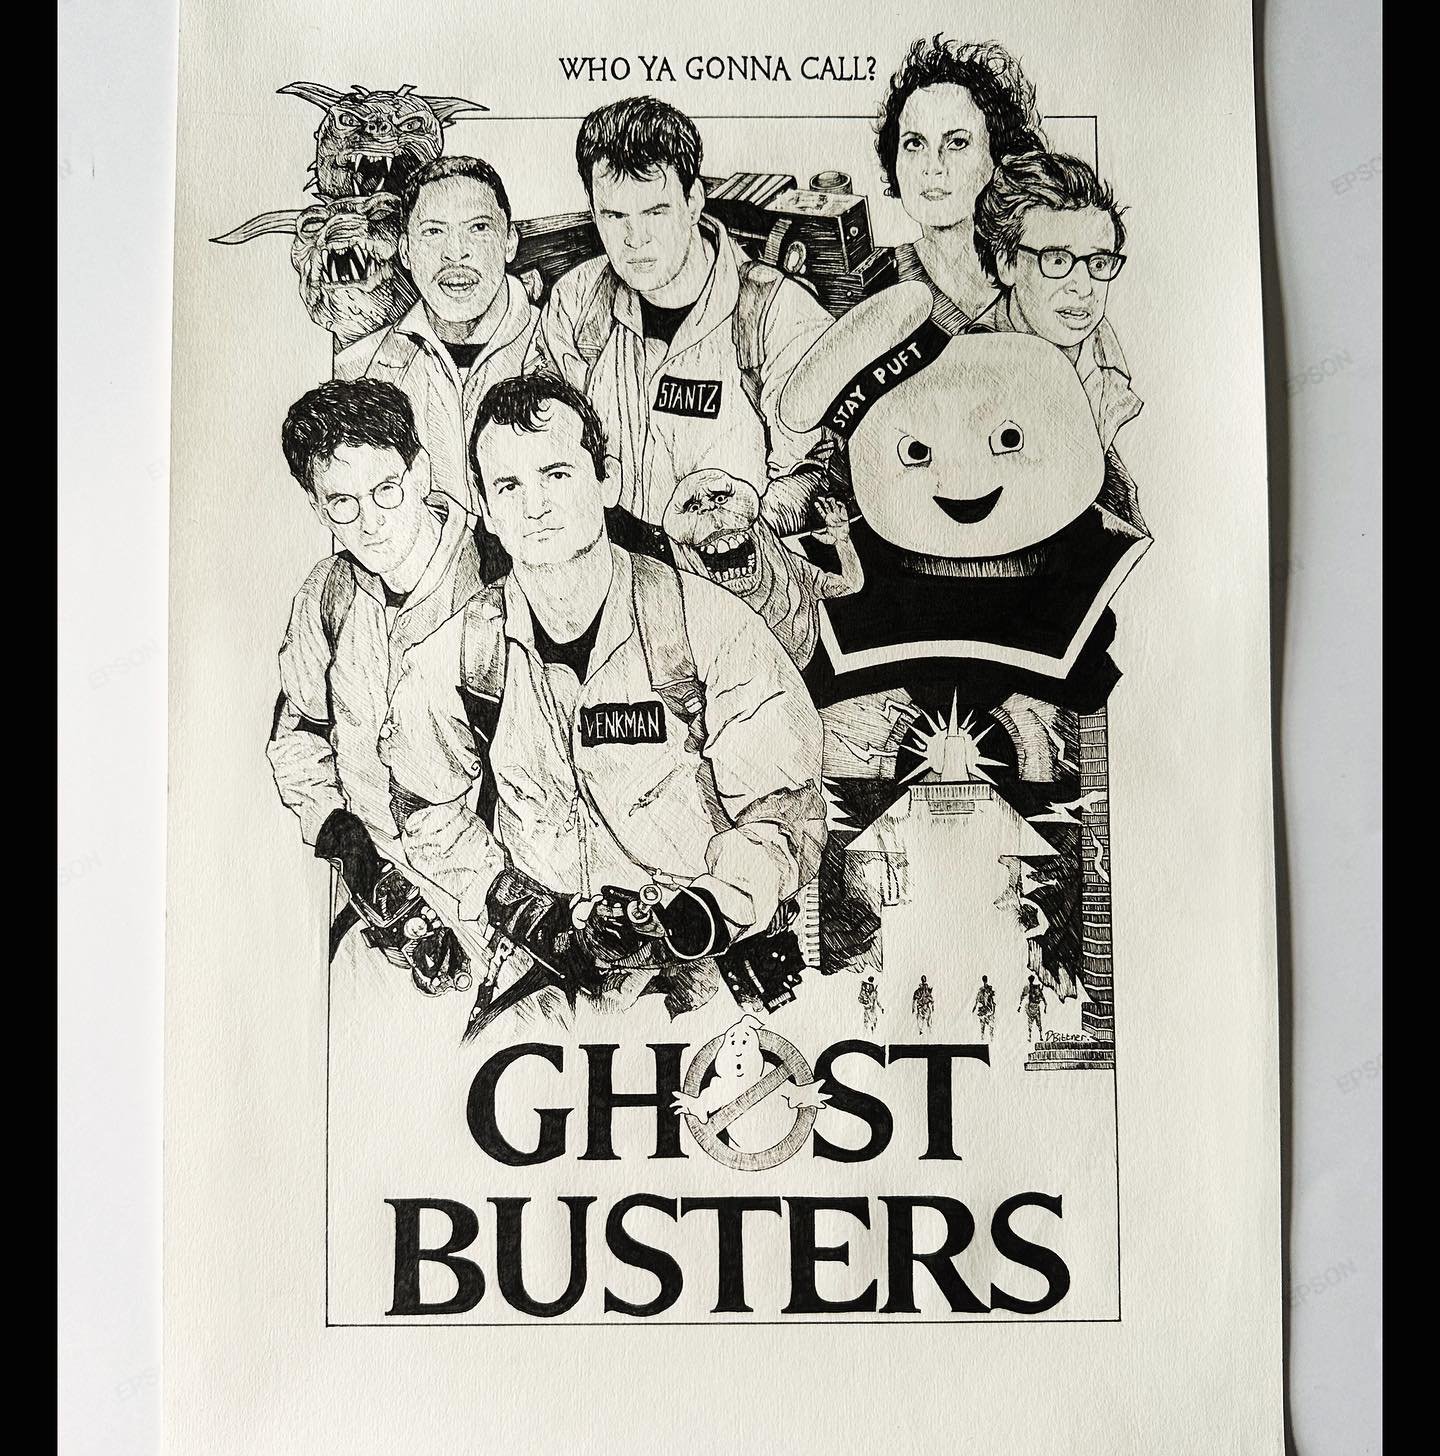 Pen on paper. I&rsquo;m currently working on a drawing for Green Room (2016). Should be up in the coming days!

#ghostbusters #ghostbuster #ghostbustersfan #movies #movieart #alternativemovieposter #ivanreitman #billmurray #danaykroyd #haroldramis #e